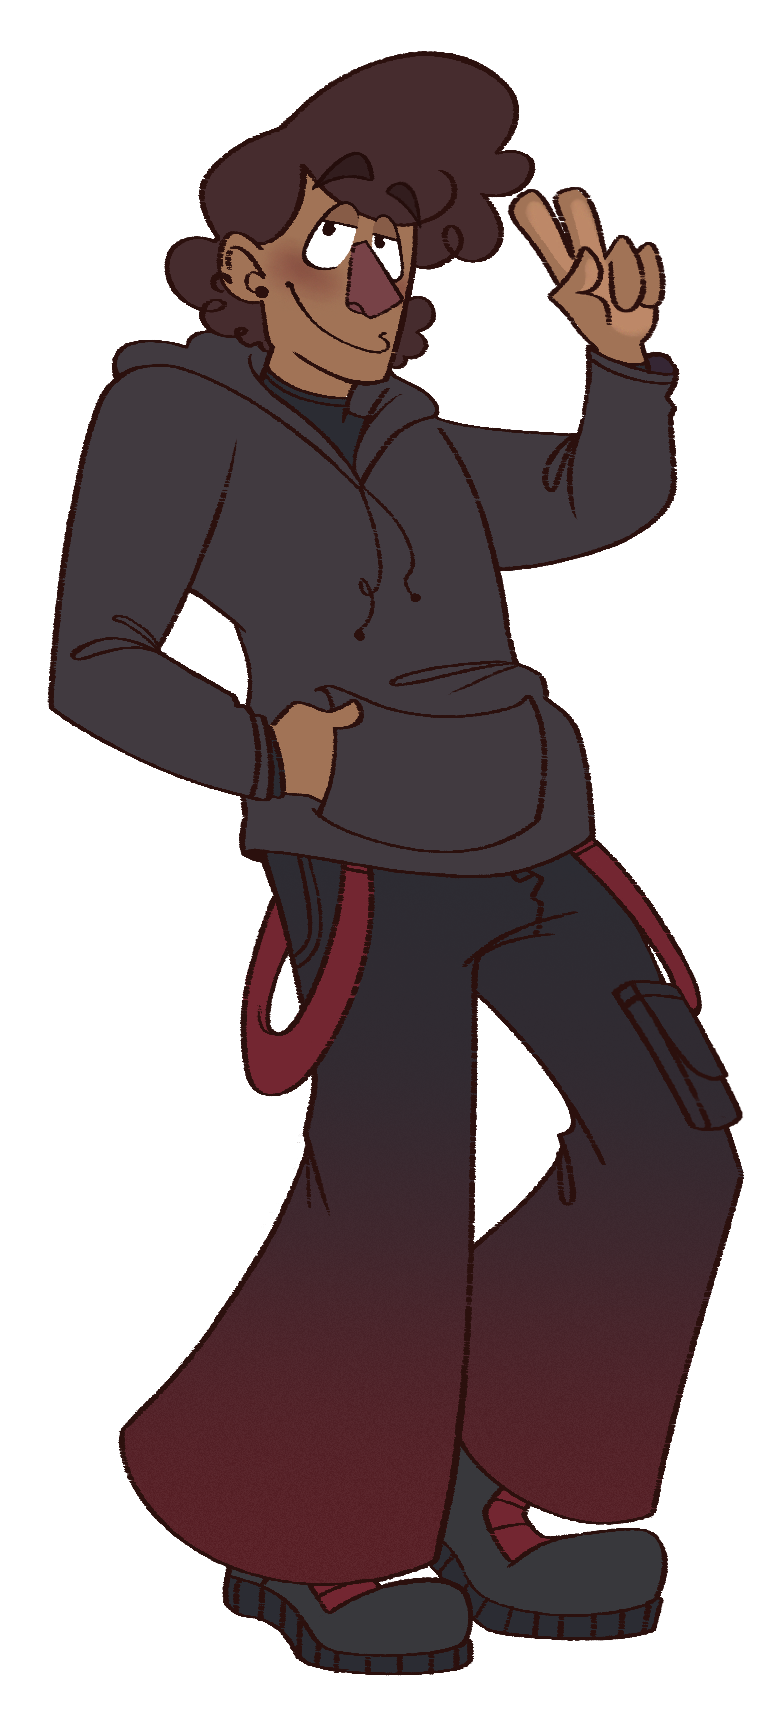 A fullbody drawing of Russel; he has brown curly hair and wears a black hoodie, black pants with a red gradient on the legs, and black and red sneakers. He has a cool and calm smile on his face, and he is holding up a peace sign.